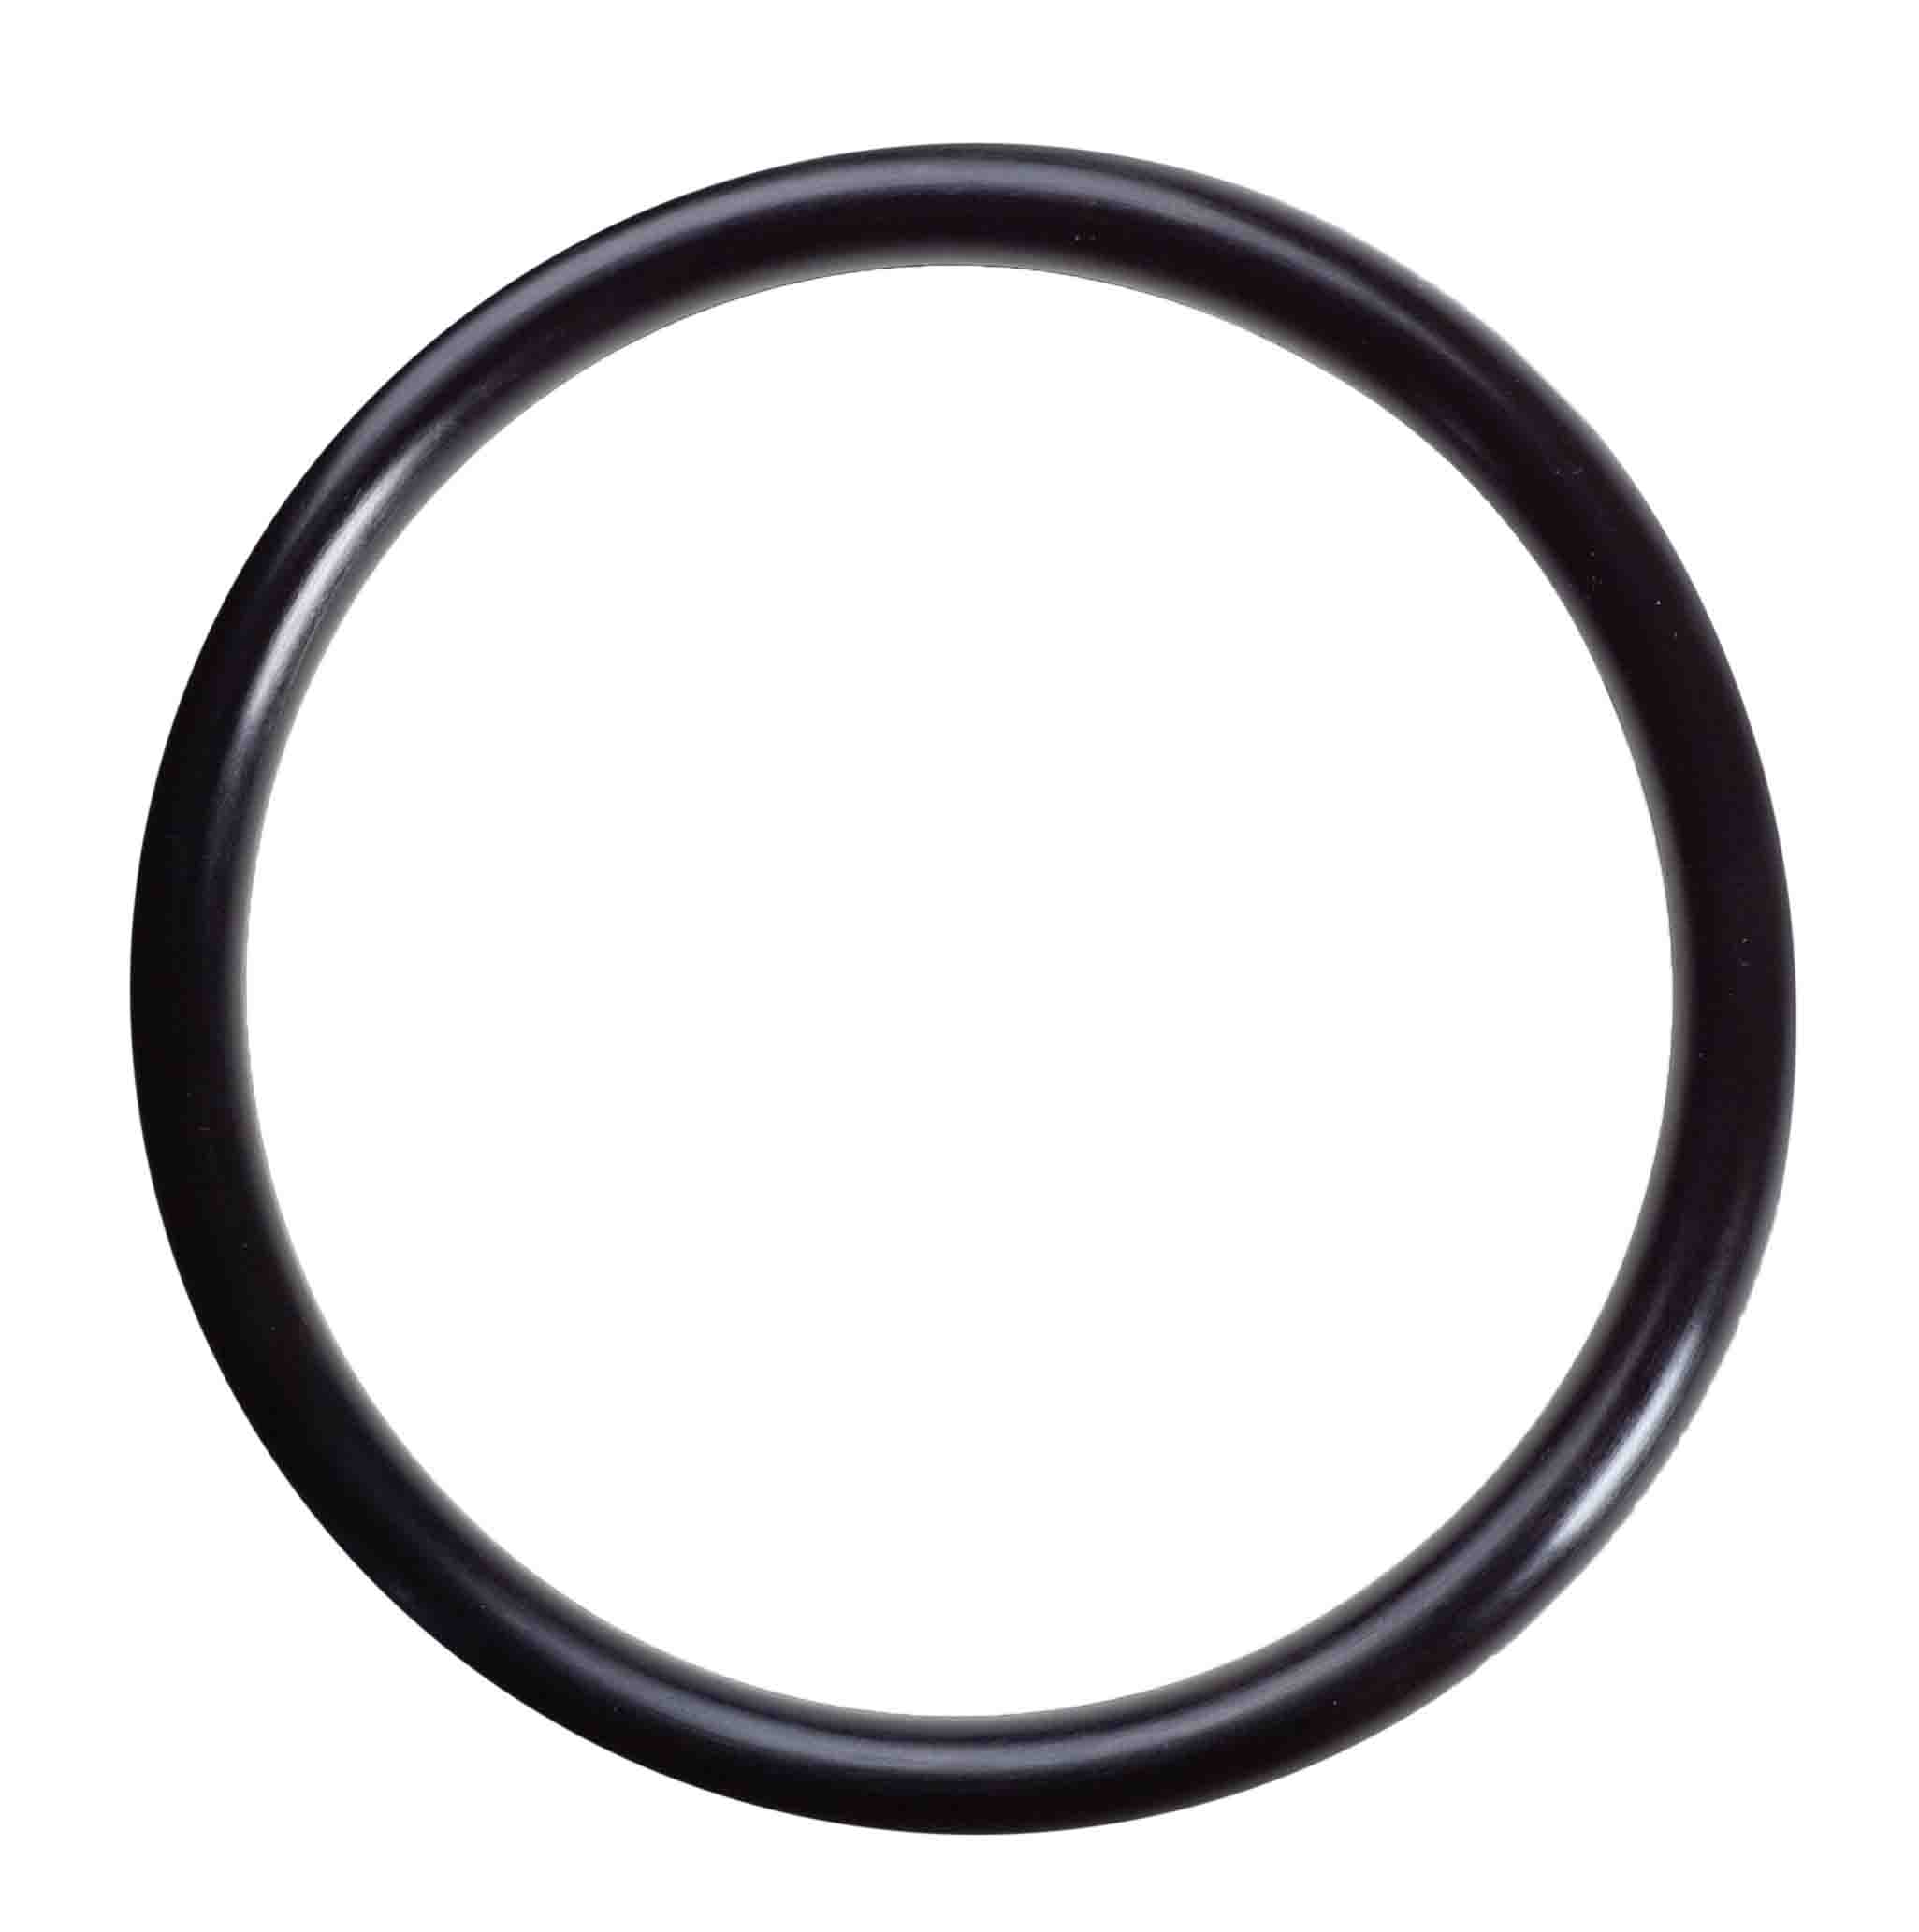 06808 - Housing O-rings for Nanopure II system